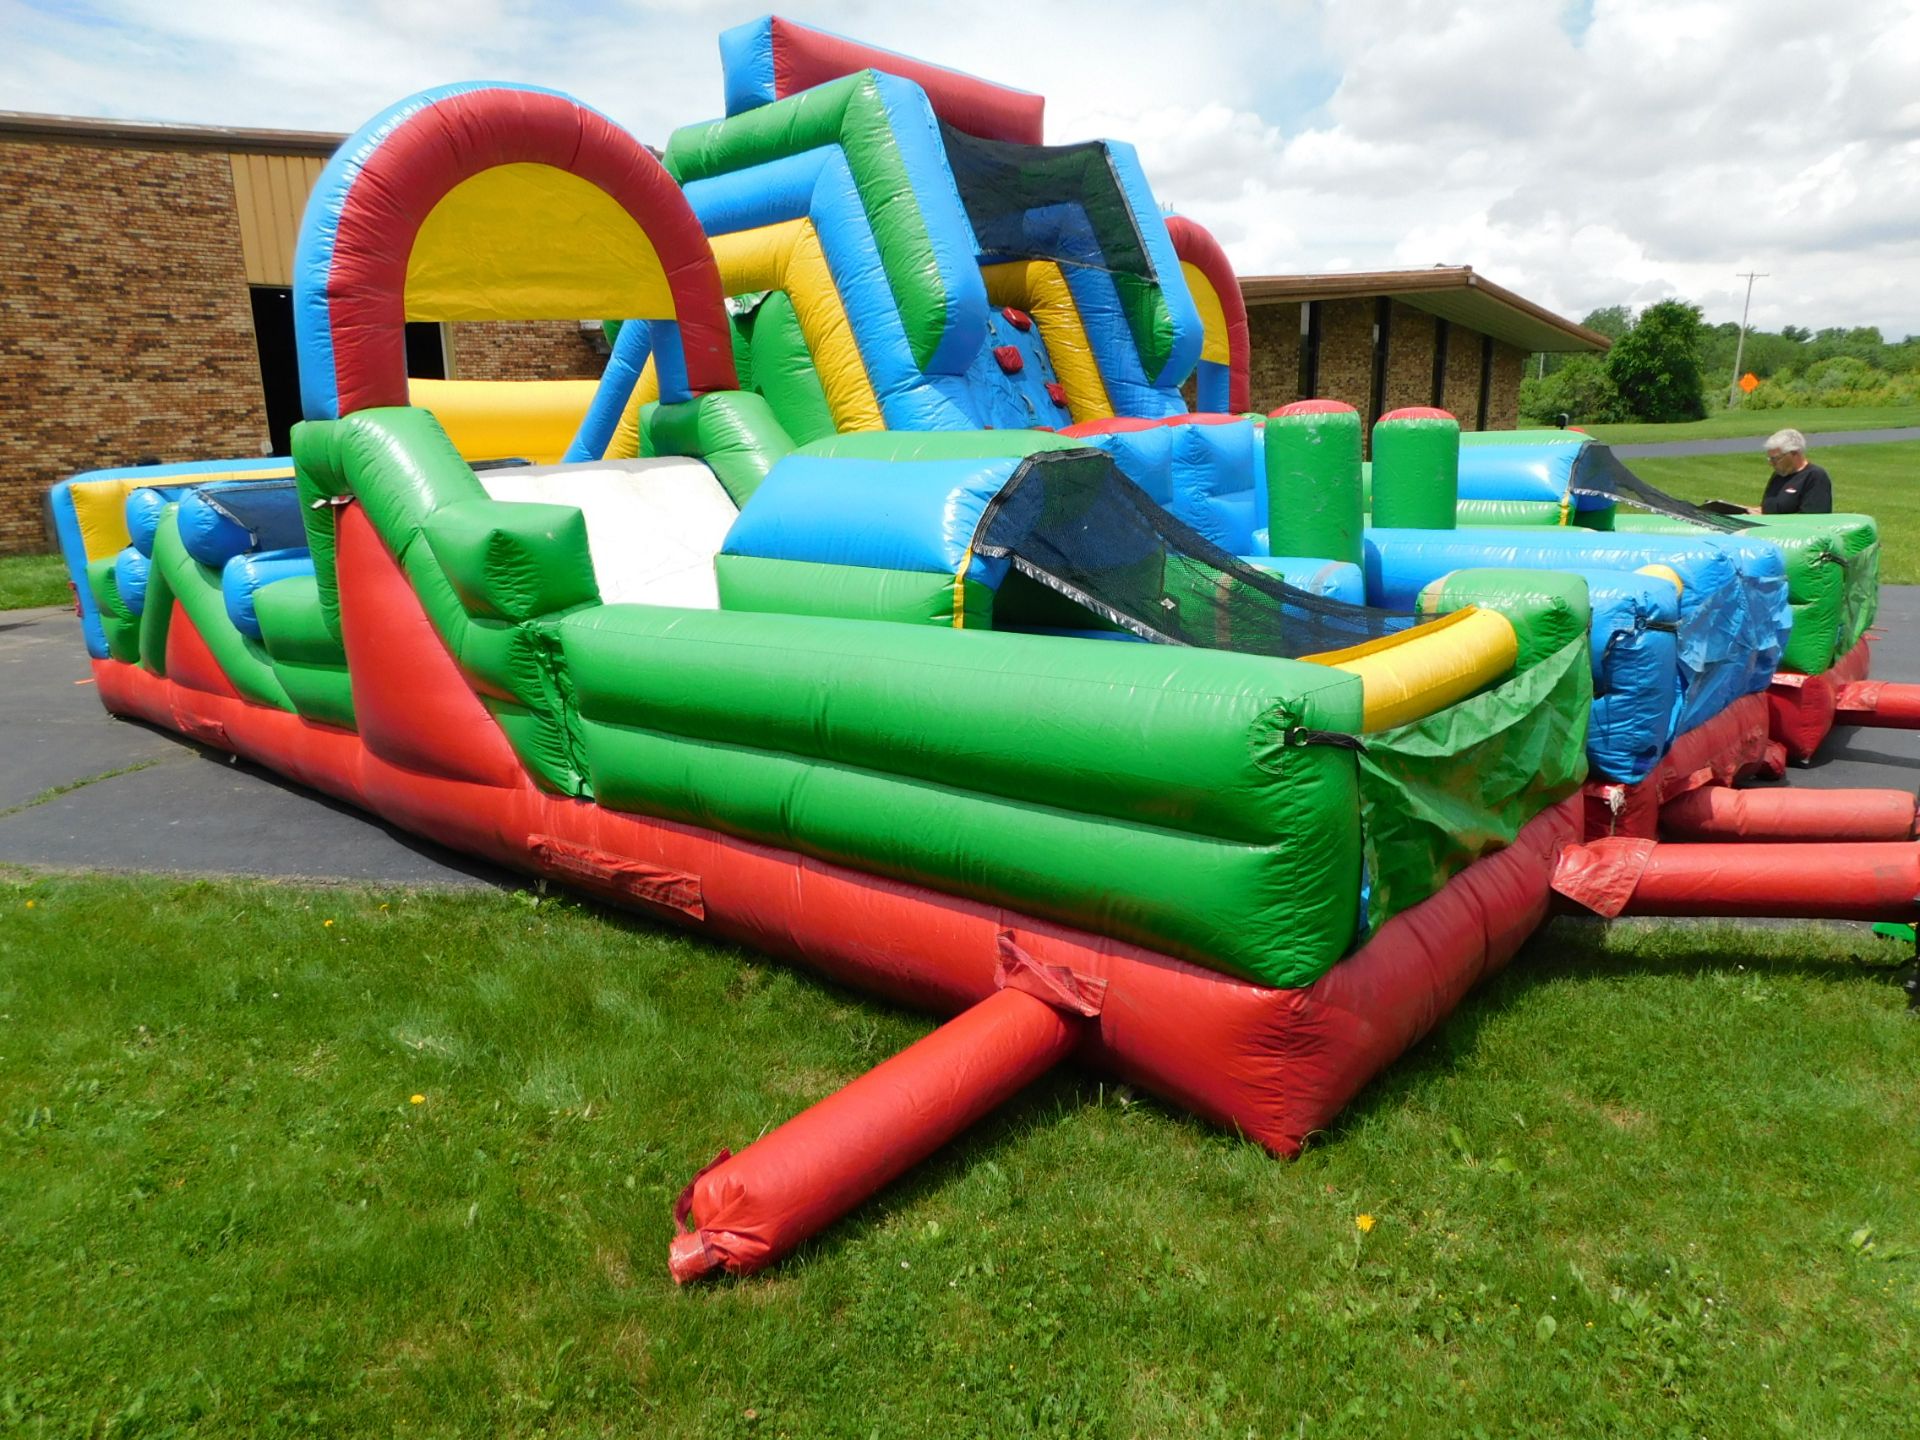 Inflatable Store "Adrenaline Rush" The Next Generation 3 piece Inflatable Obstacle Course, 24'WX34' - Image 3 of 28